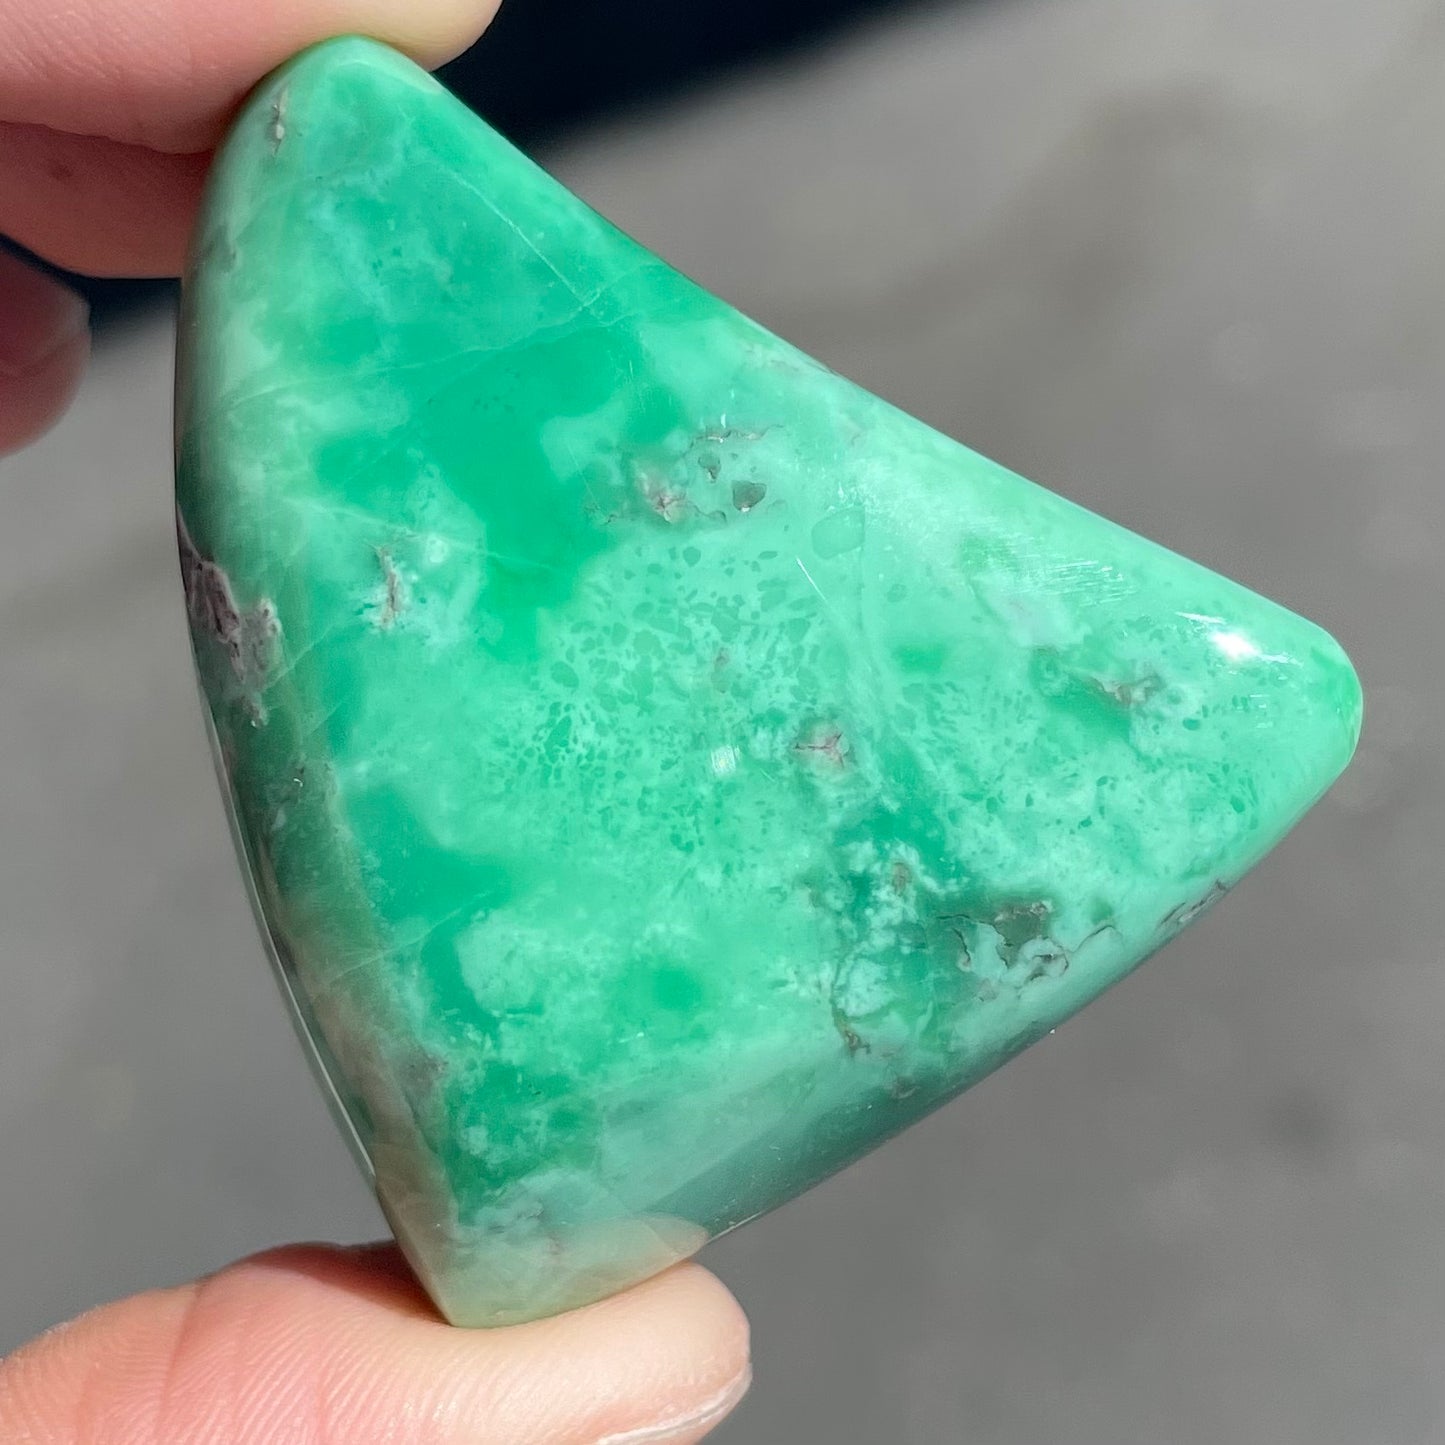 A loose, polished triangular cabochon cut variscite stone from Utah, USA.